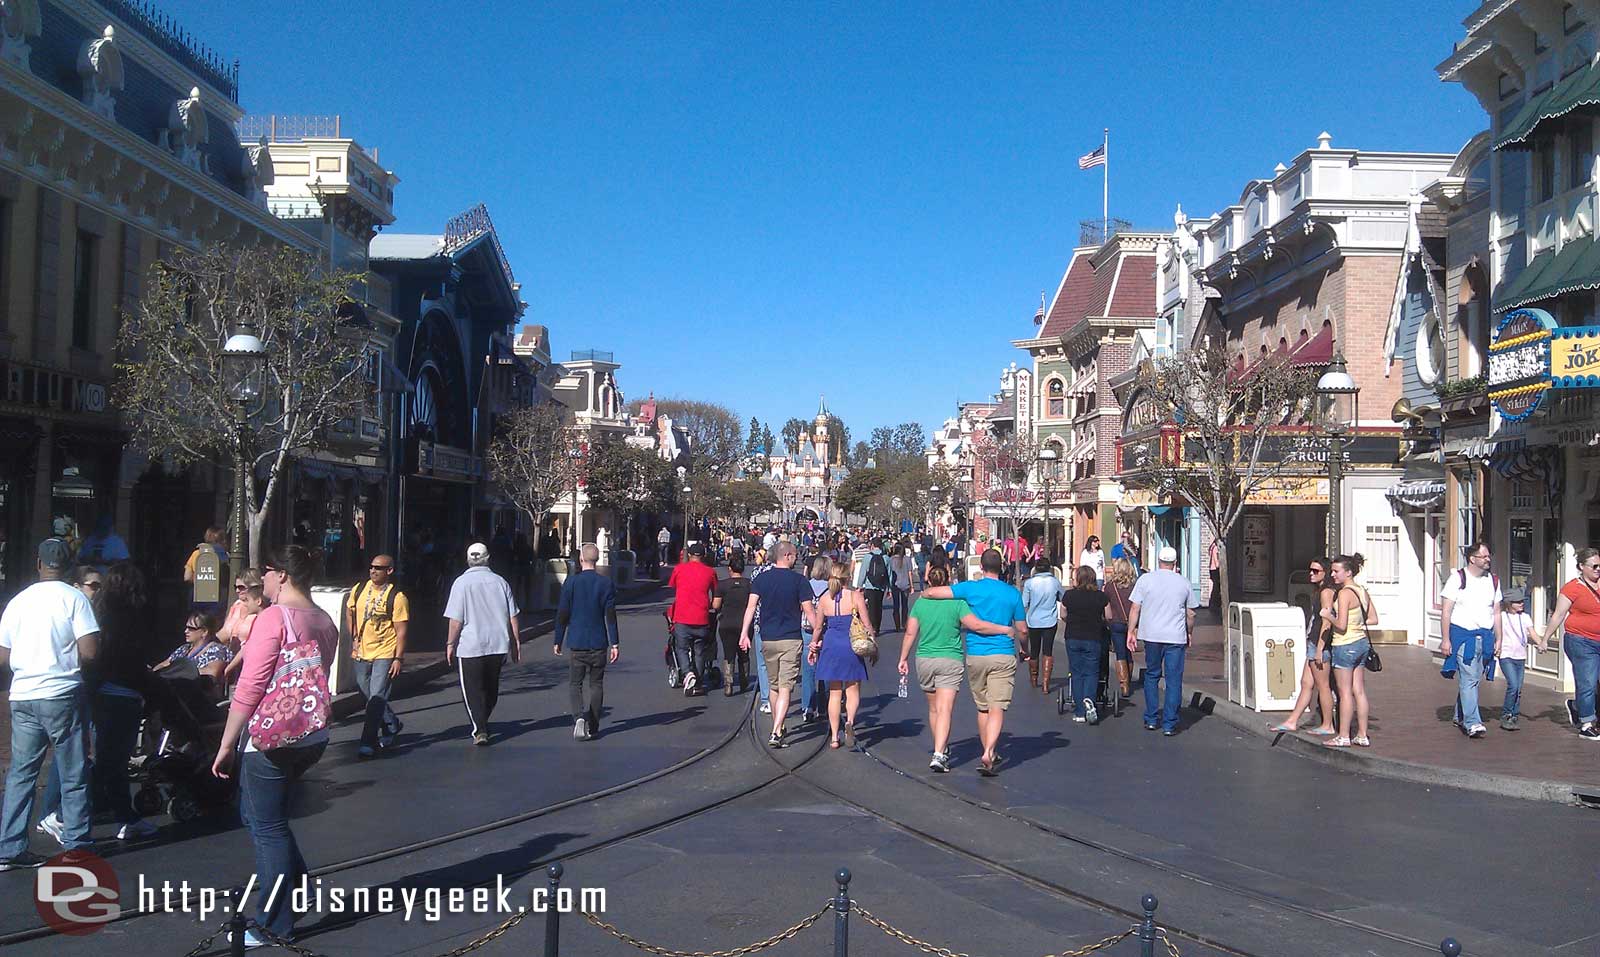 Just arrived at the Disneyland Resort. A look down Main Street